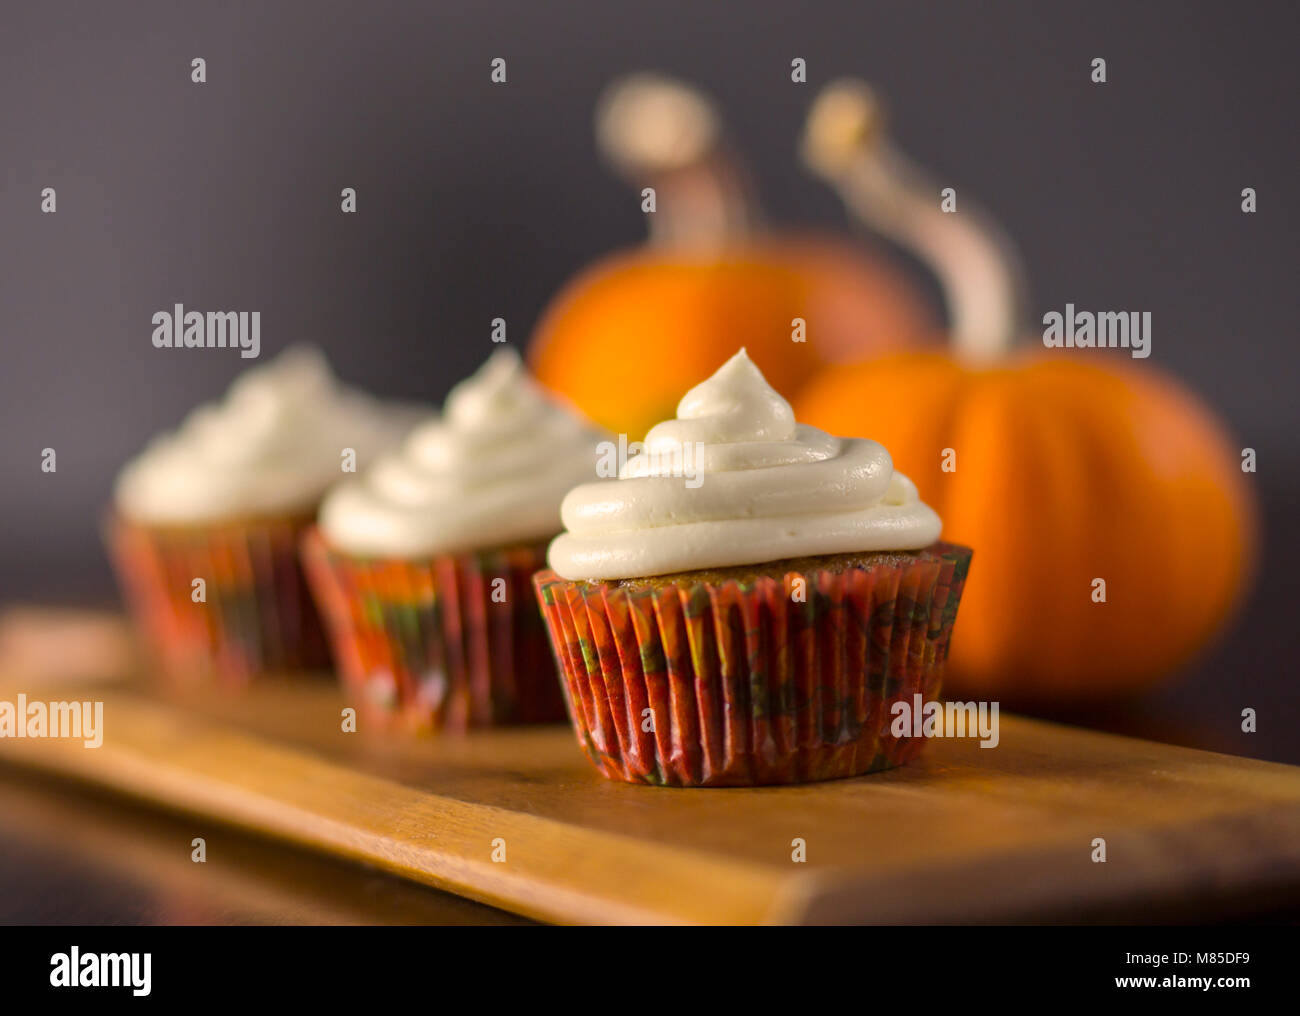 Delicious Pumpkin Spice Cupcakes with Cream Cheese Frosting with Pumpkins in the Background Stock Photo